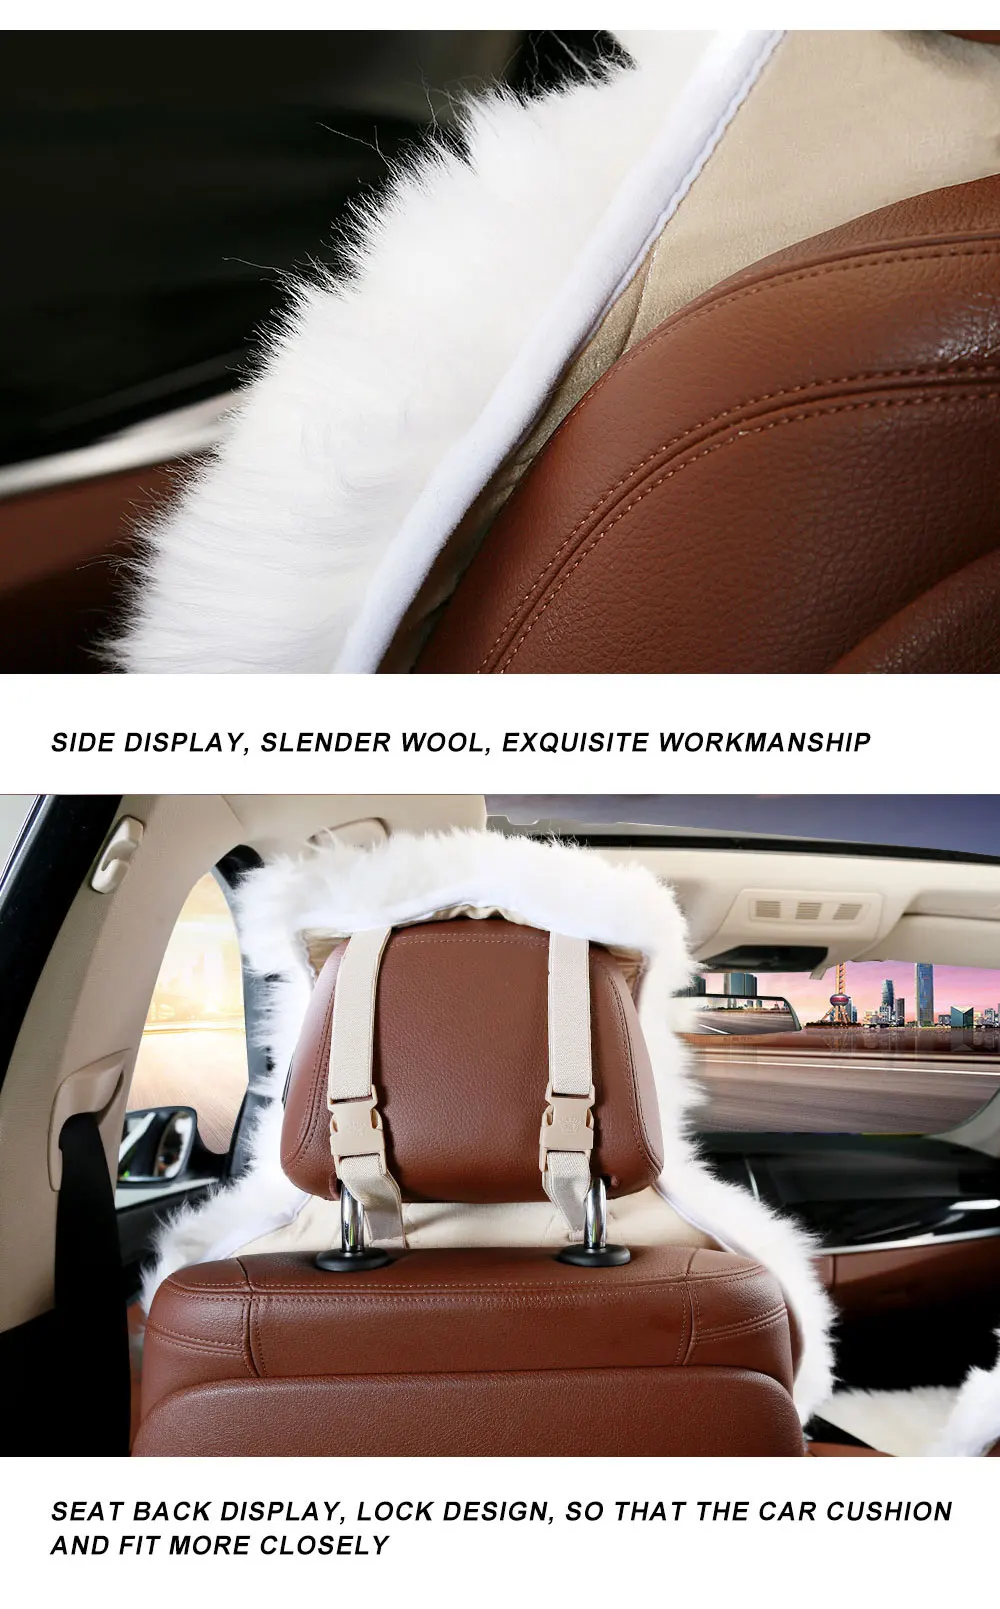 2pcs Natural fur sheepskin car seat cover seasons 3 colour front seat cover for car peugeot 206 for car volvo s40 for car ix25